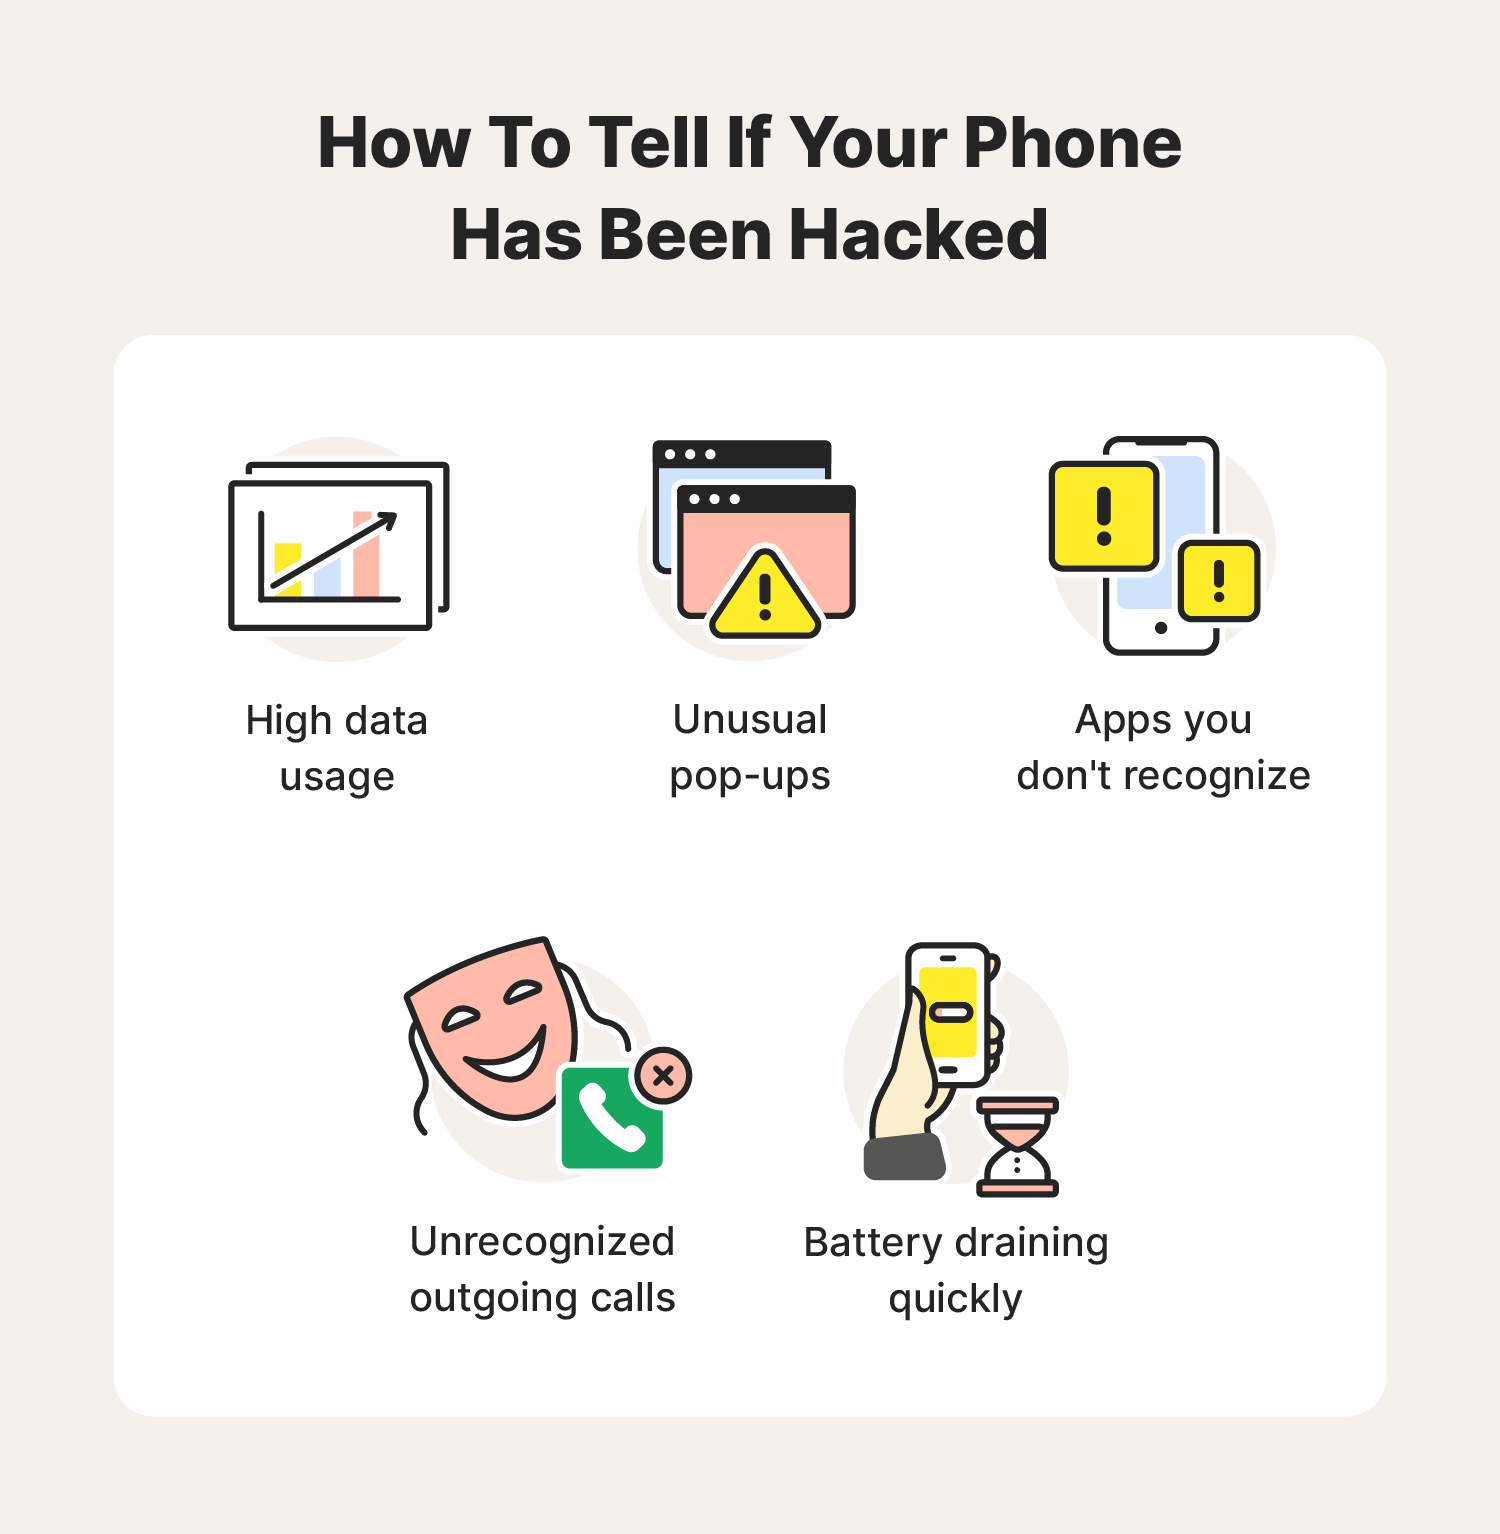 Ways you can tell if your phone has been hacked.